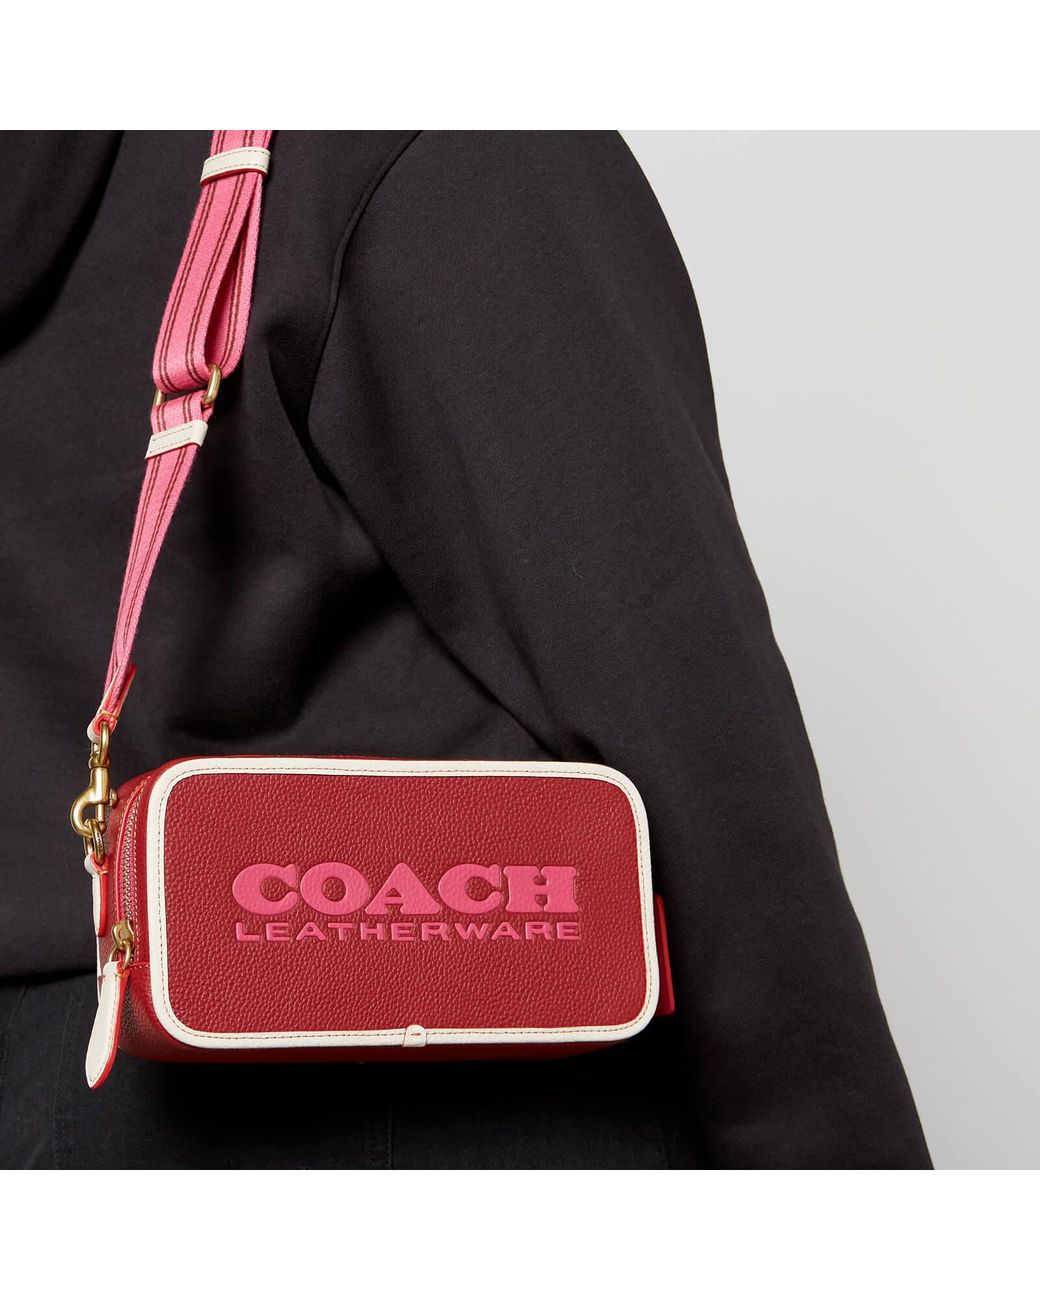 COACH Kia Leather Bag in Red | Lyst